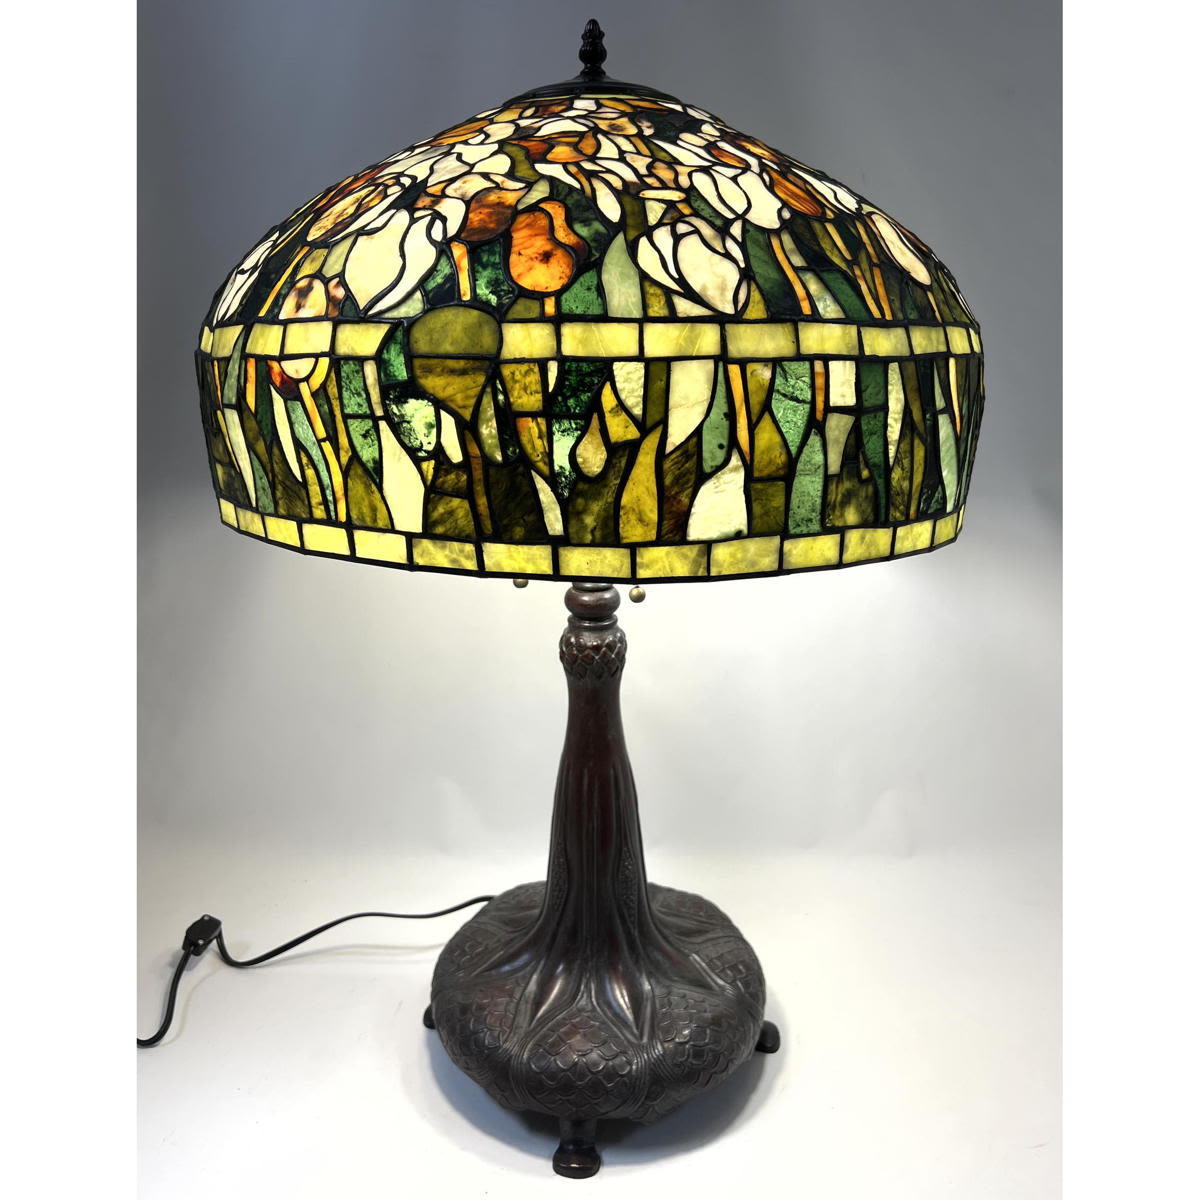 Tiffany style leaded glass table